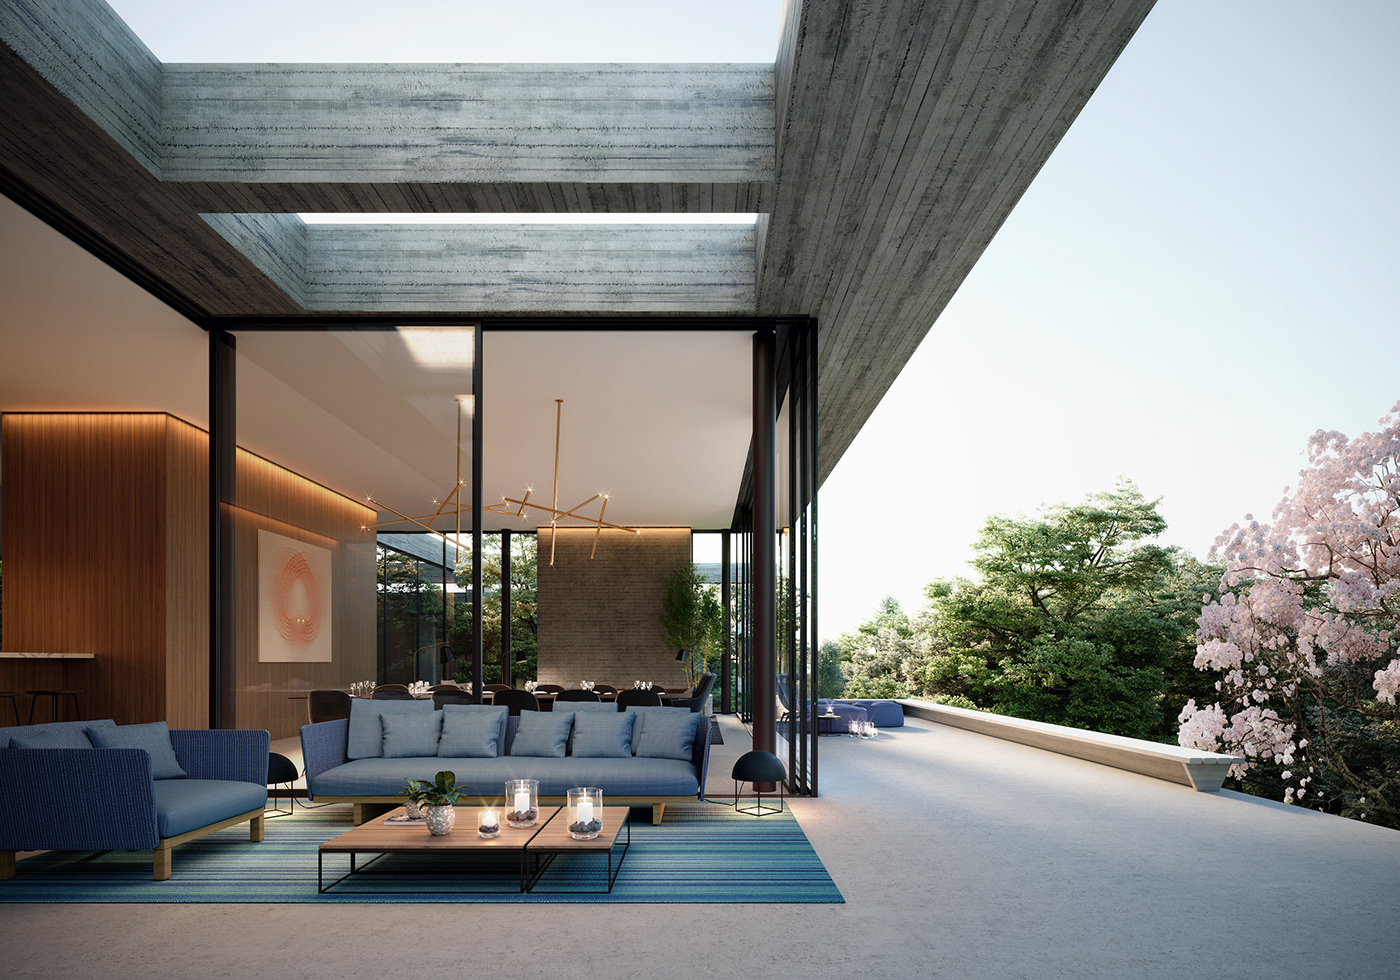 architecture mader Brazilian Architecture summit visual modernism CGI corona renderer rendering 3ds max house